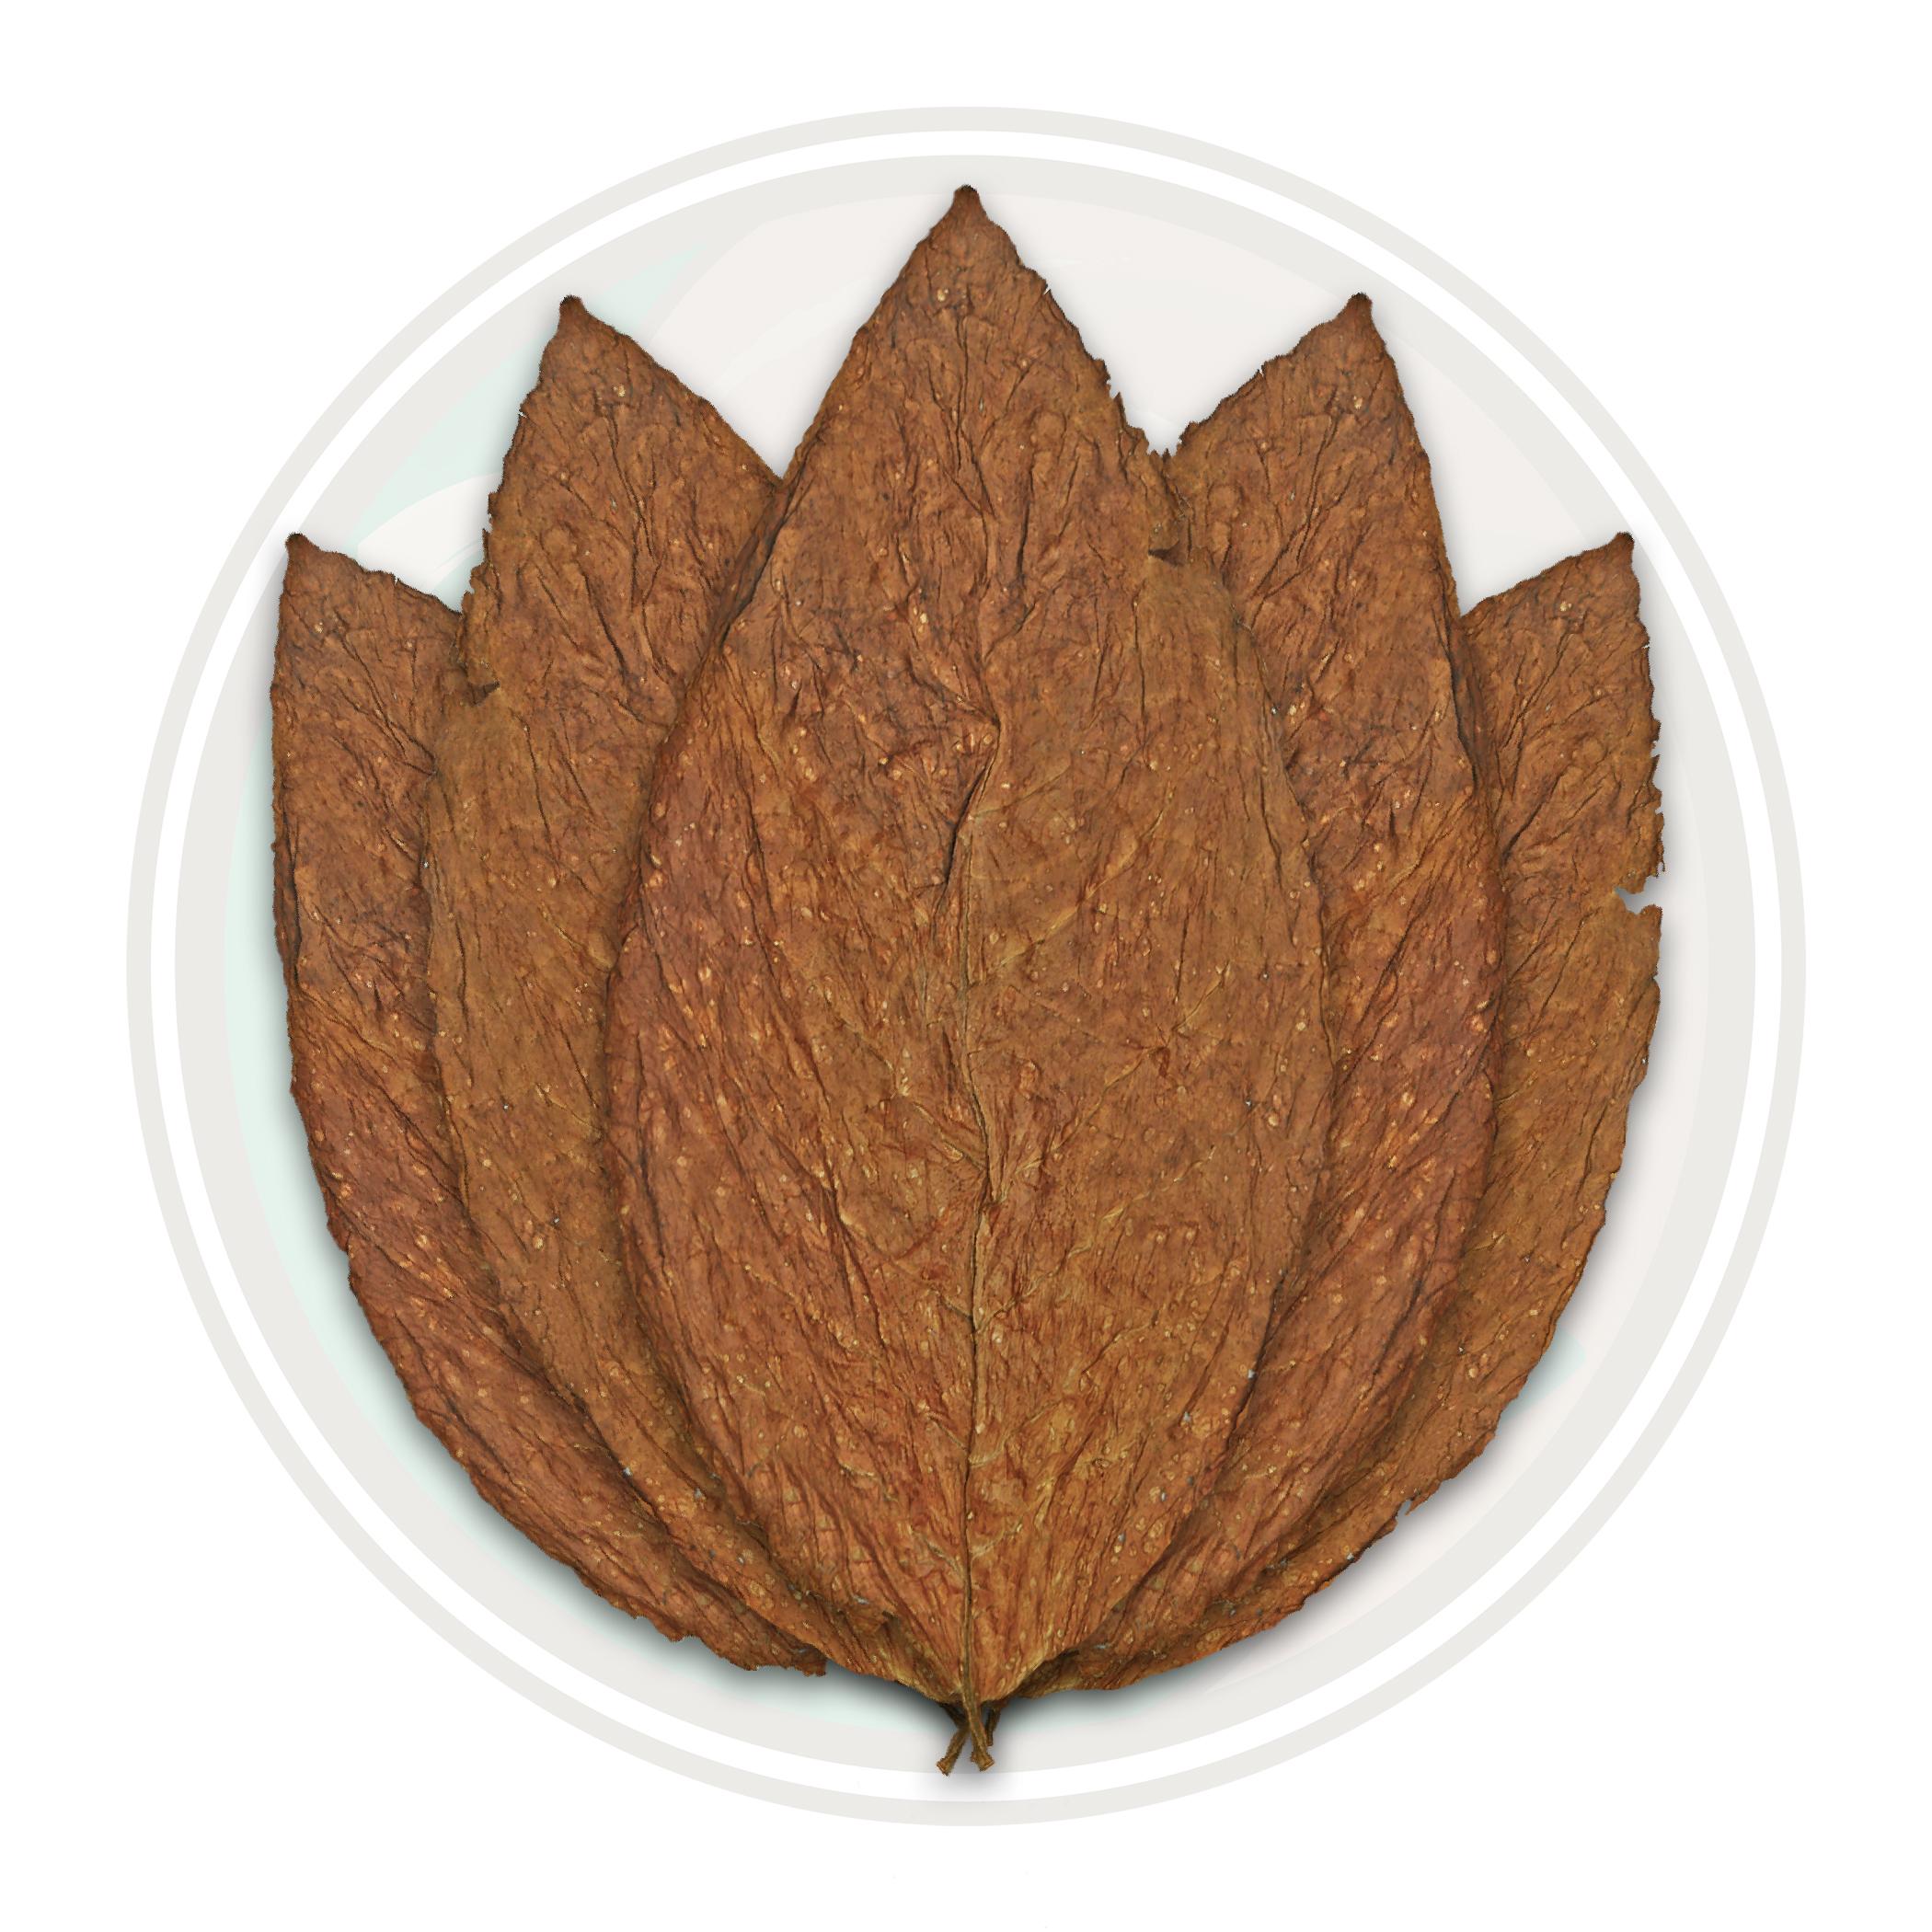 Maryland 609 Whole Tobacco Leaf Only